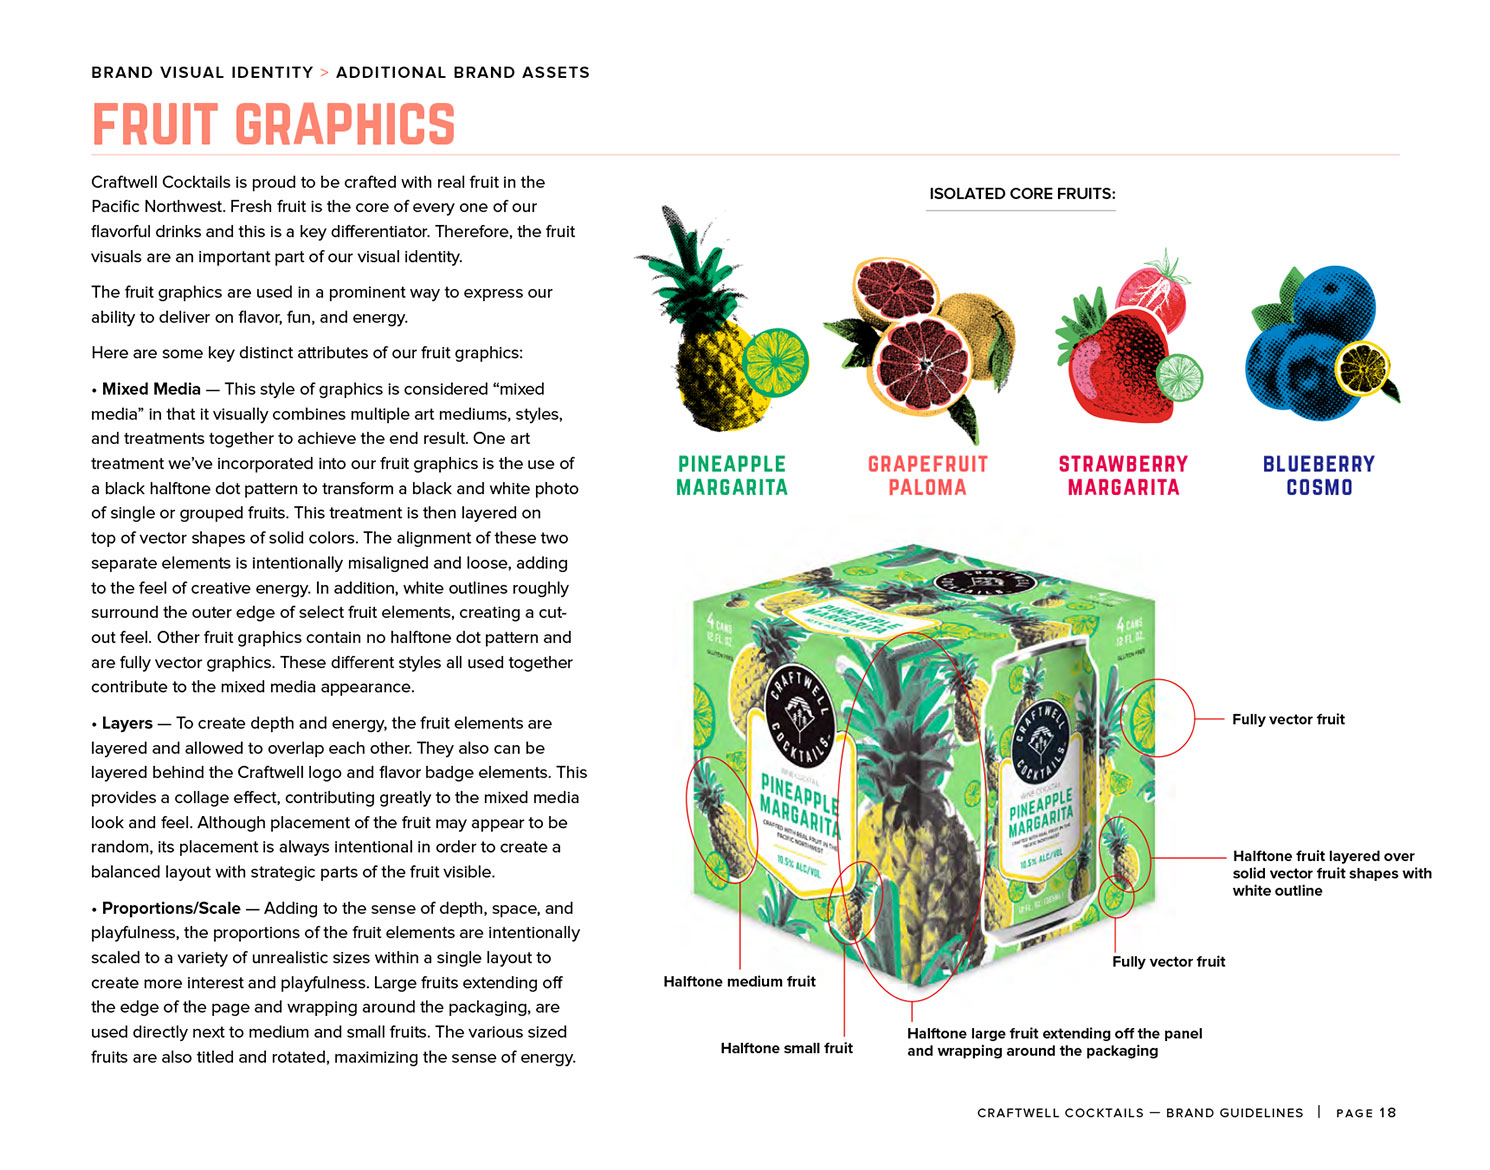 Craftwell Cocktails brand guidelines fruit graphics